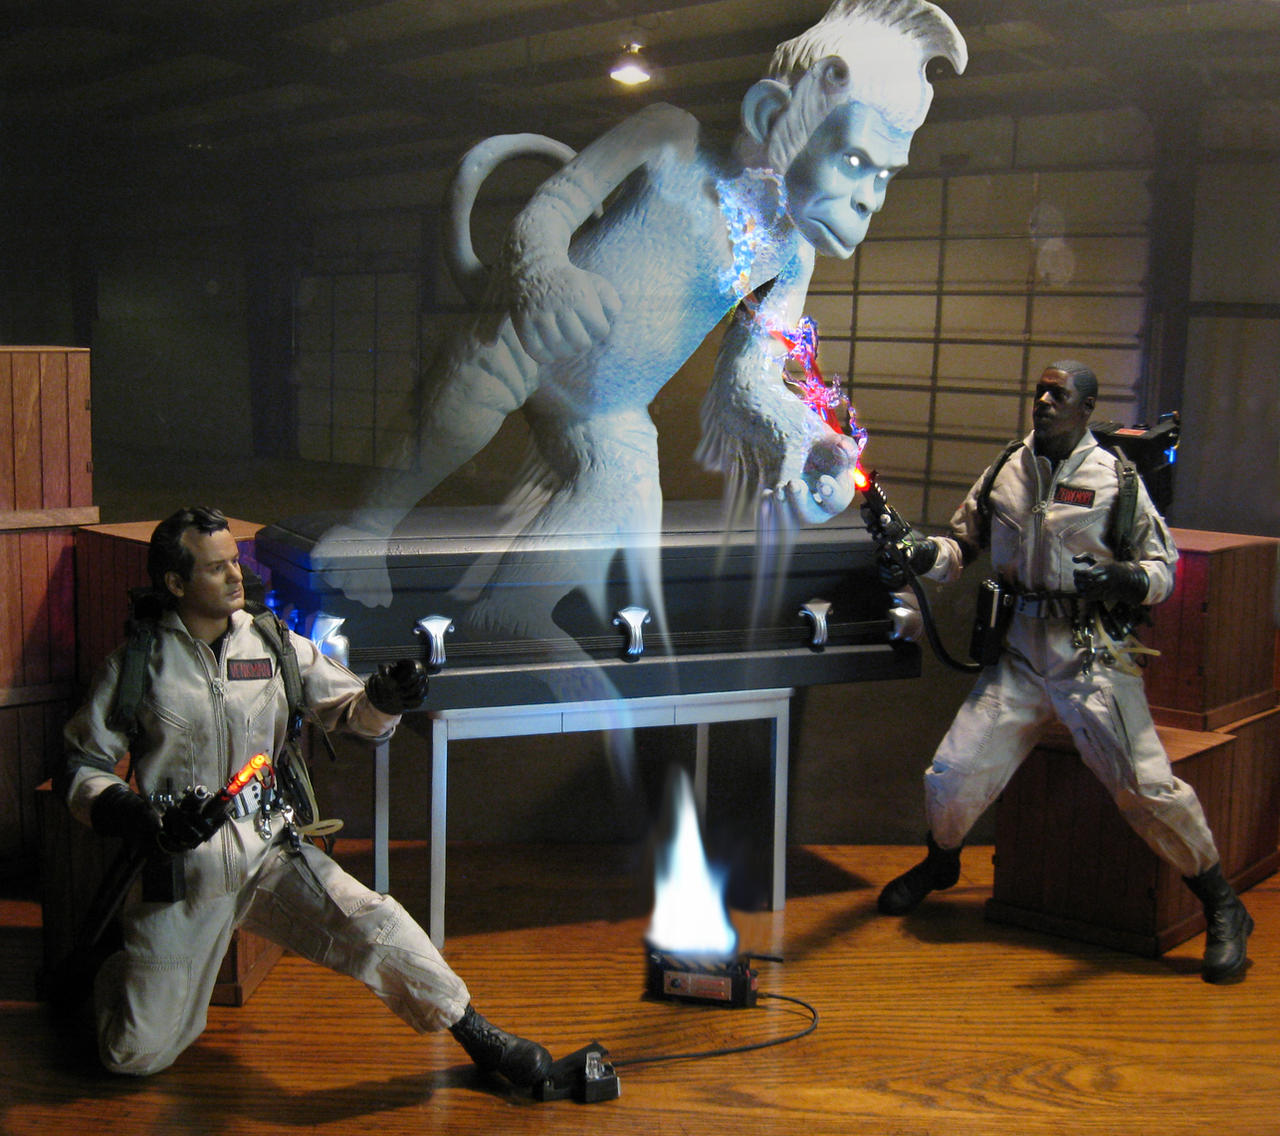 ghostbusters_warehouse_fight_by_thedollknight-dbwfdvv.jpg